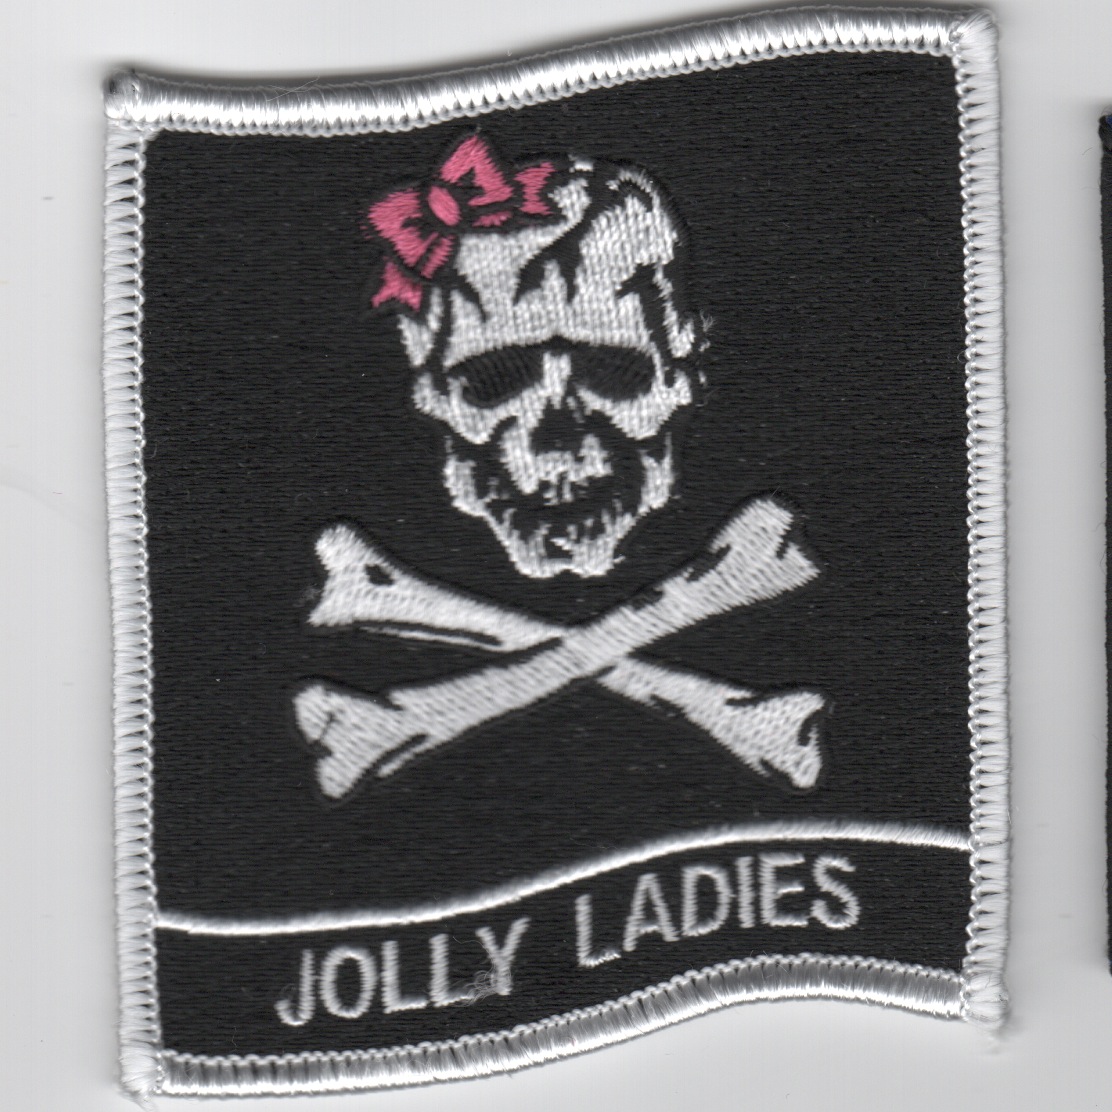 VFA-103 'Jolly Ladies' Patch